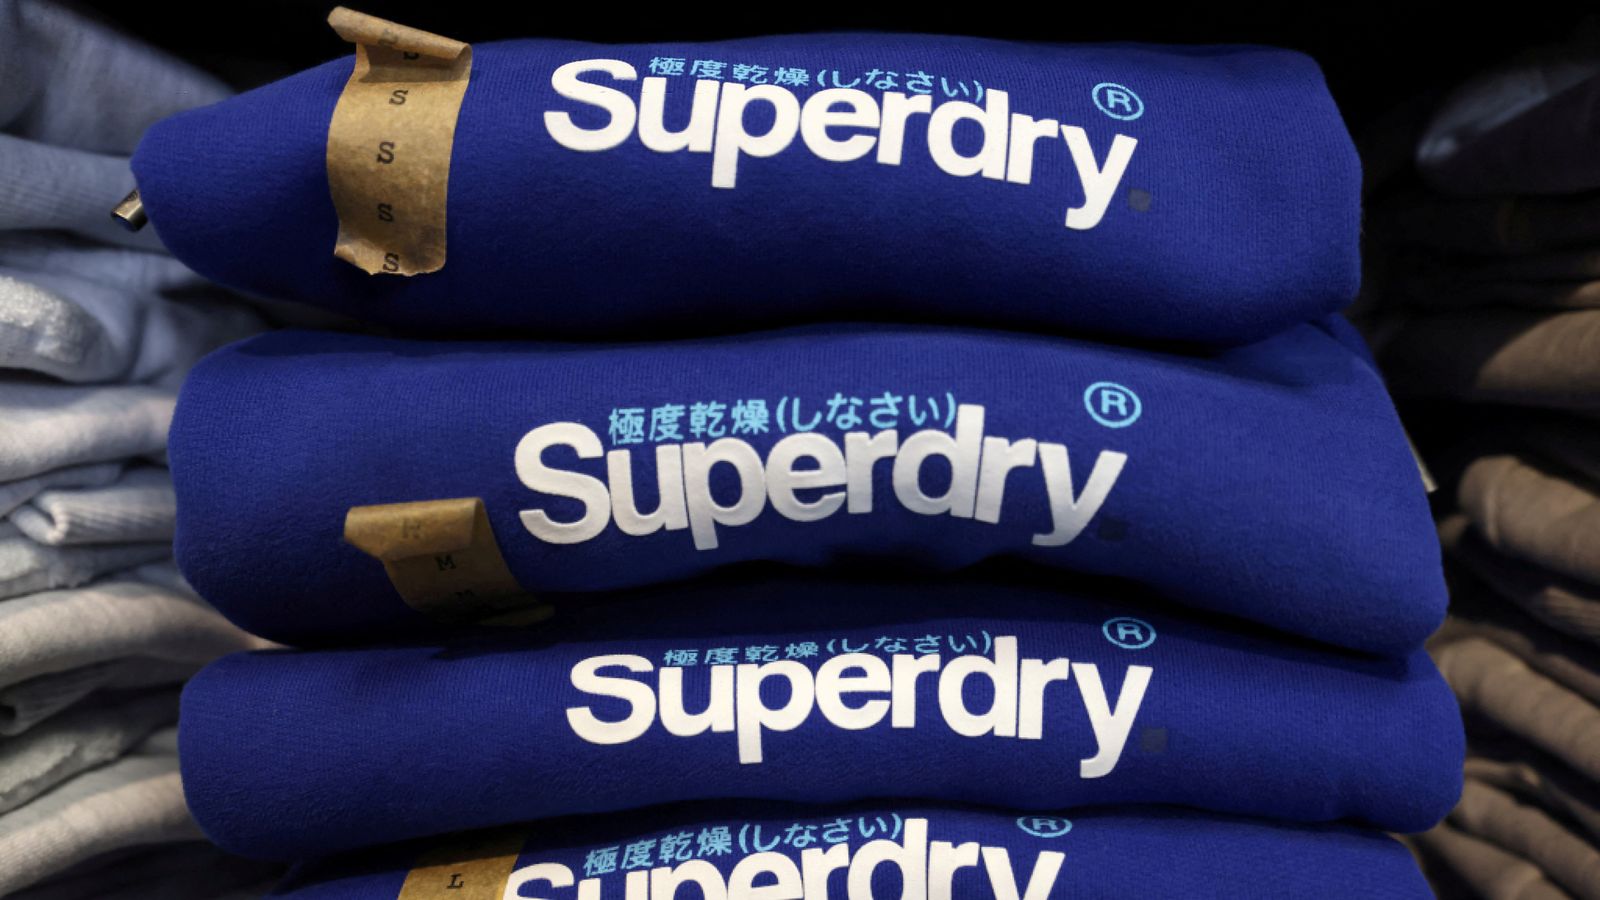 Fears for future of 'super soggy' Superdry as shares slump to record low